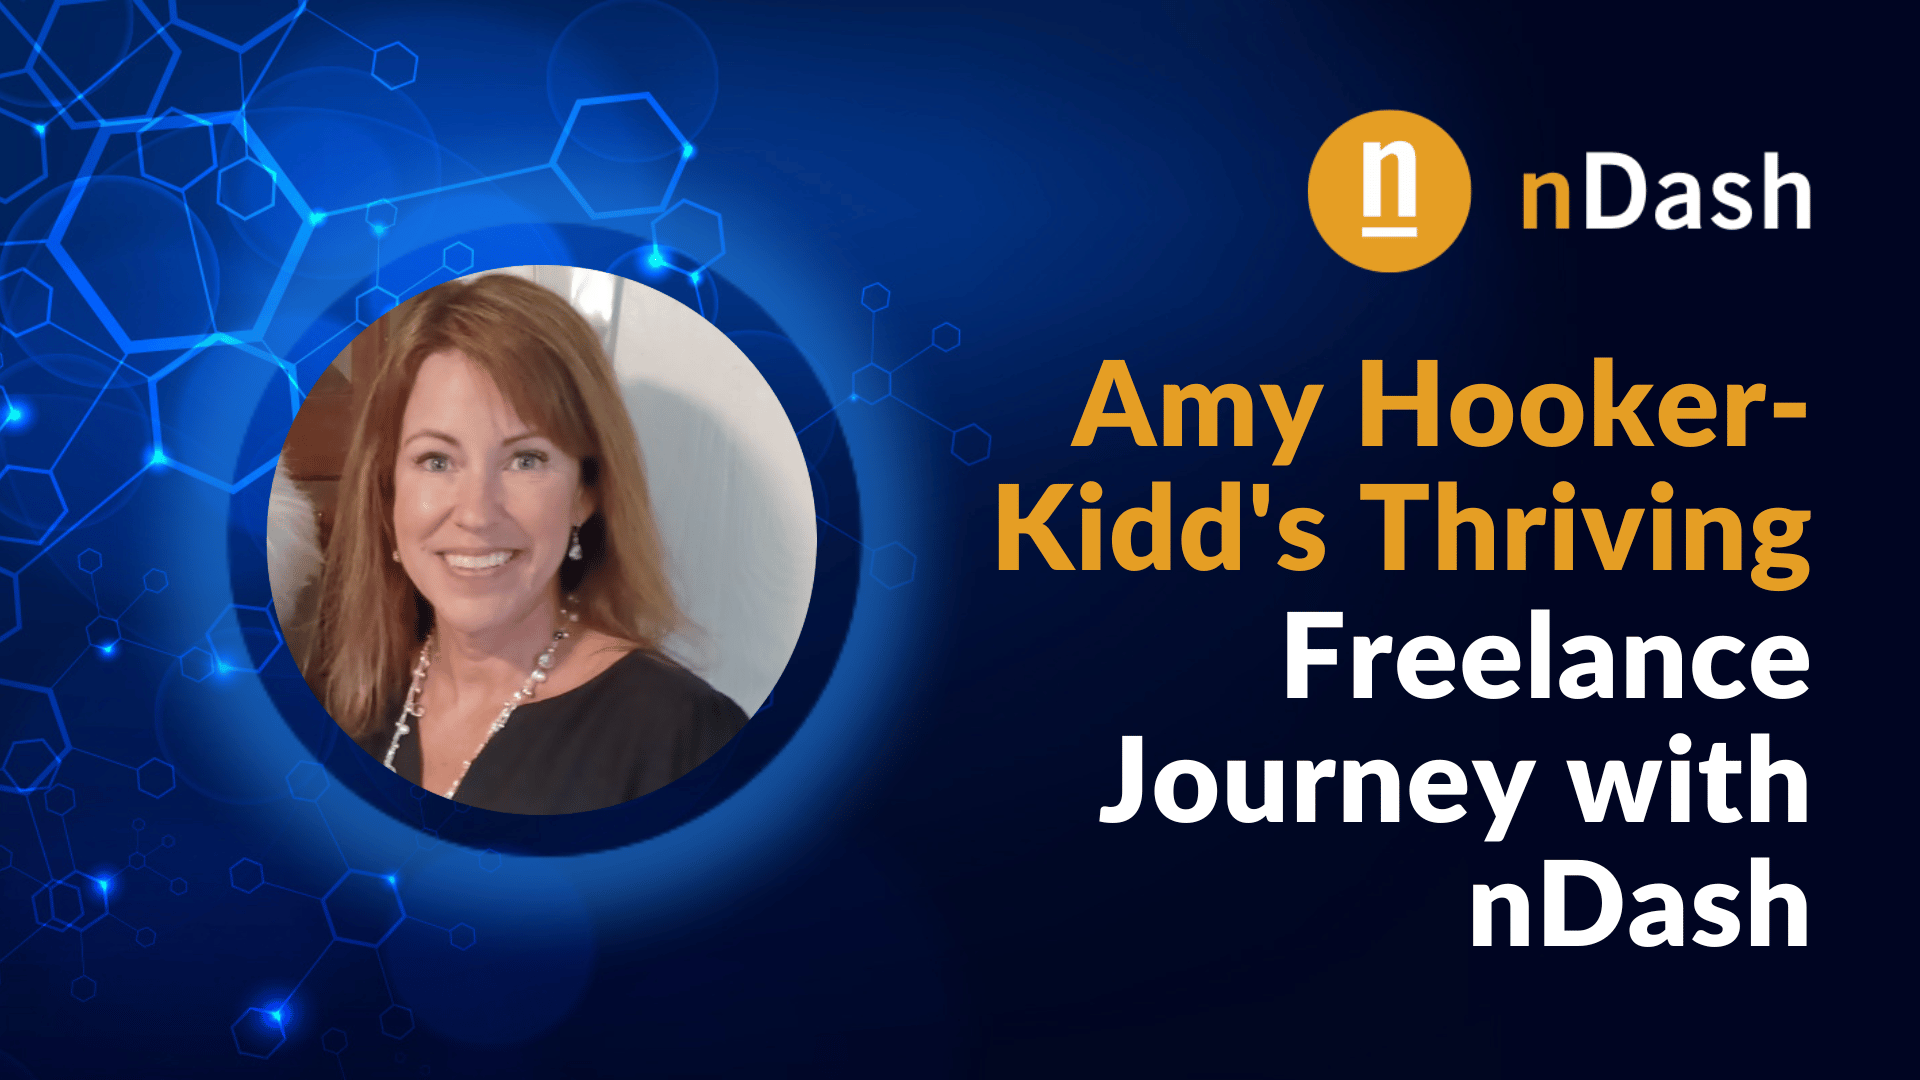 Amy Hooker-Kidd's Thriving Freelance Journey with nDash